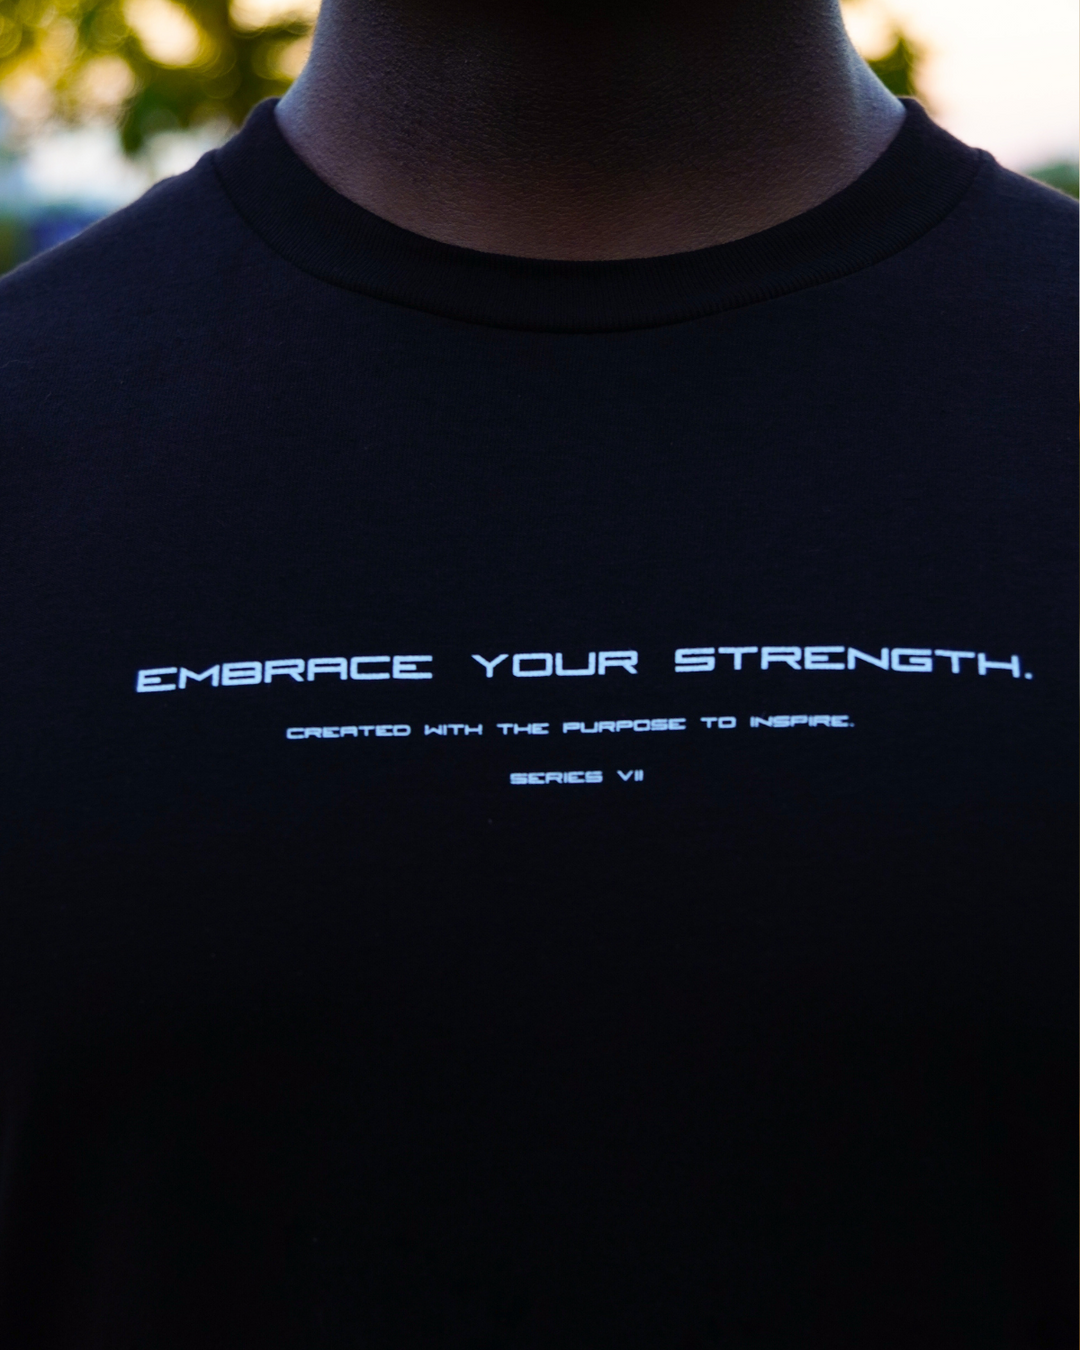 Embrace your strength. Lifestyle Tee